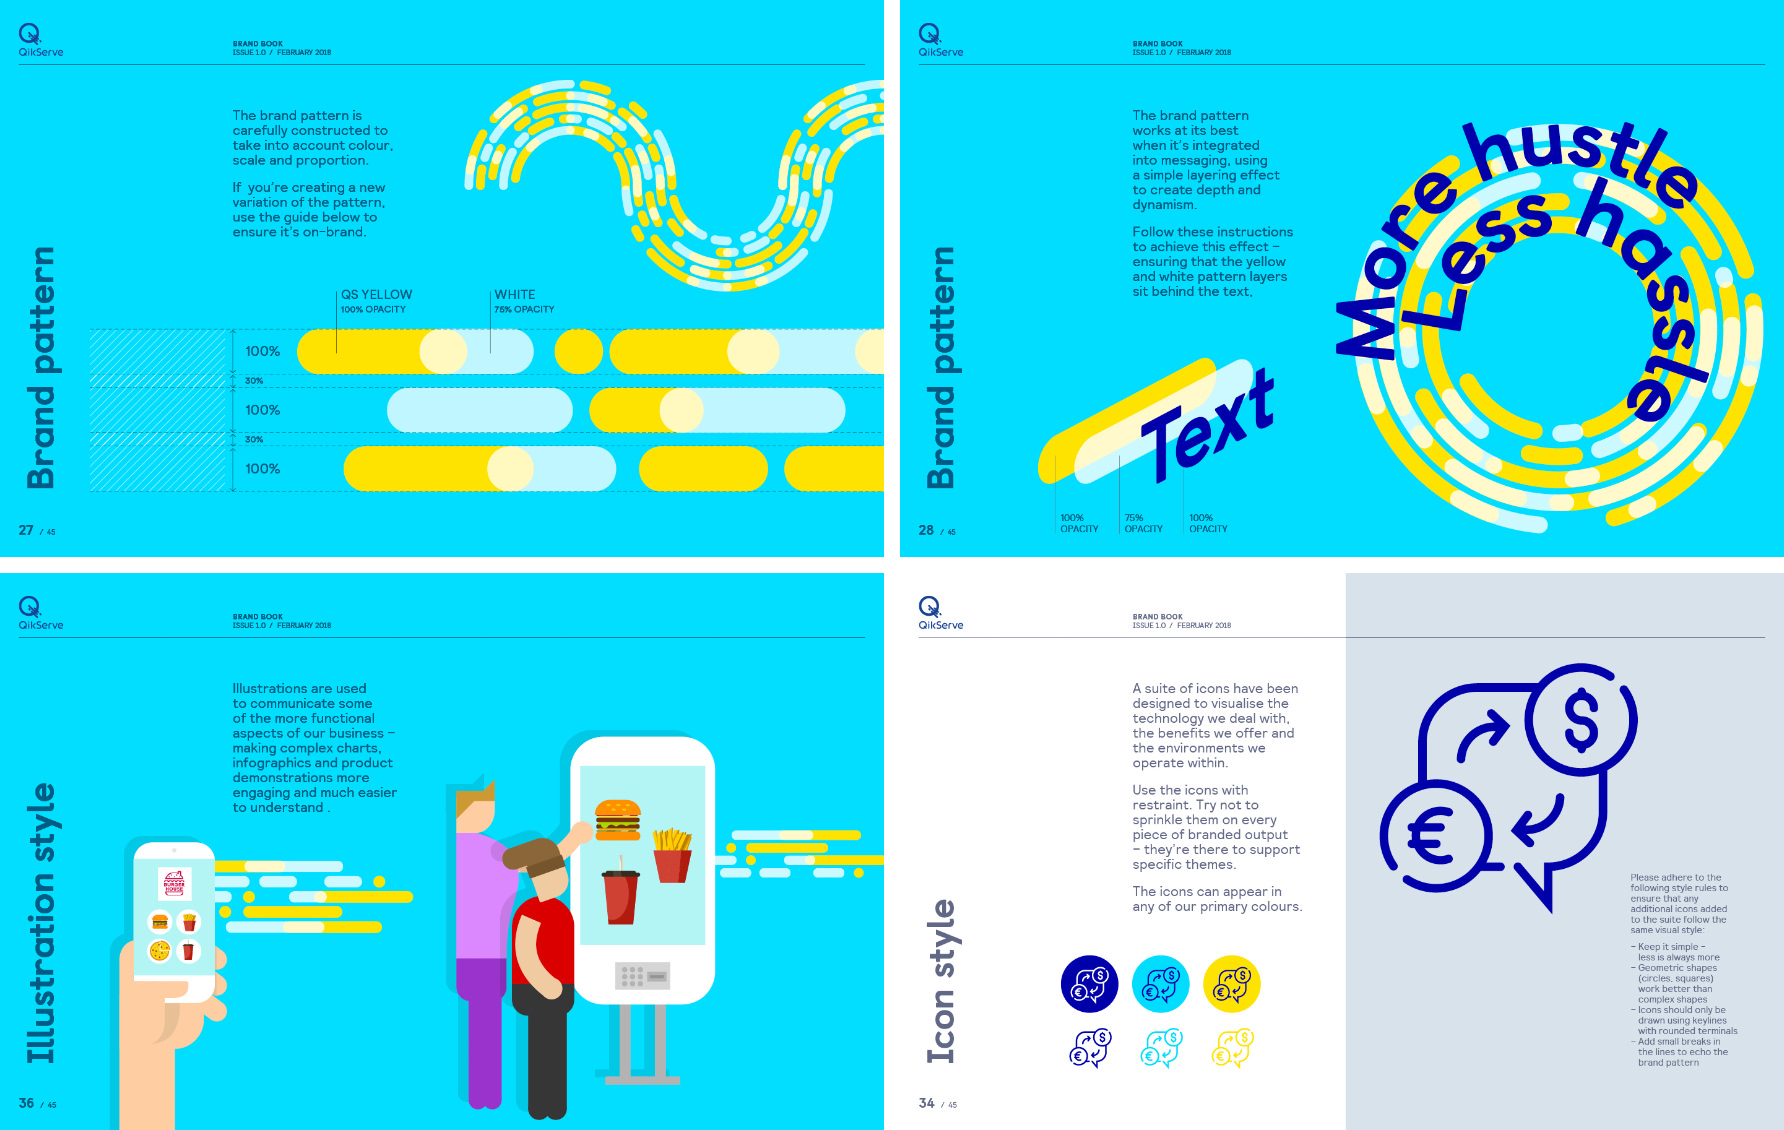 QikServe brand guidelines designed by Monumentum